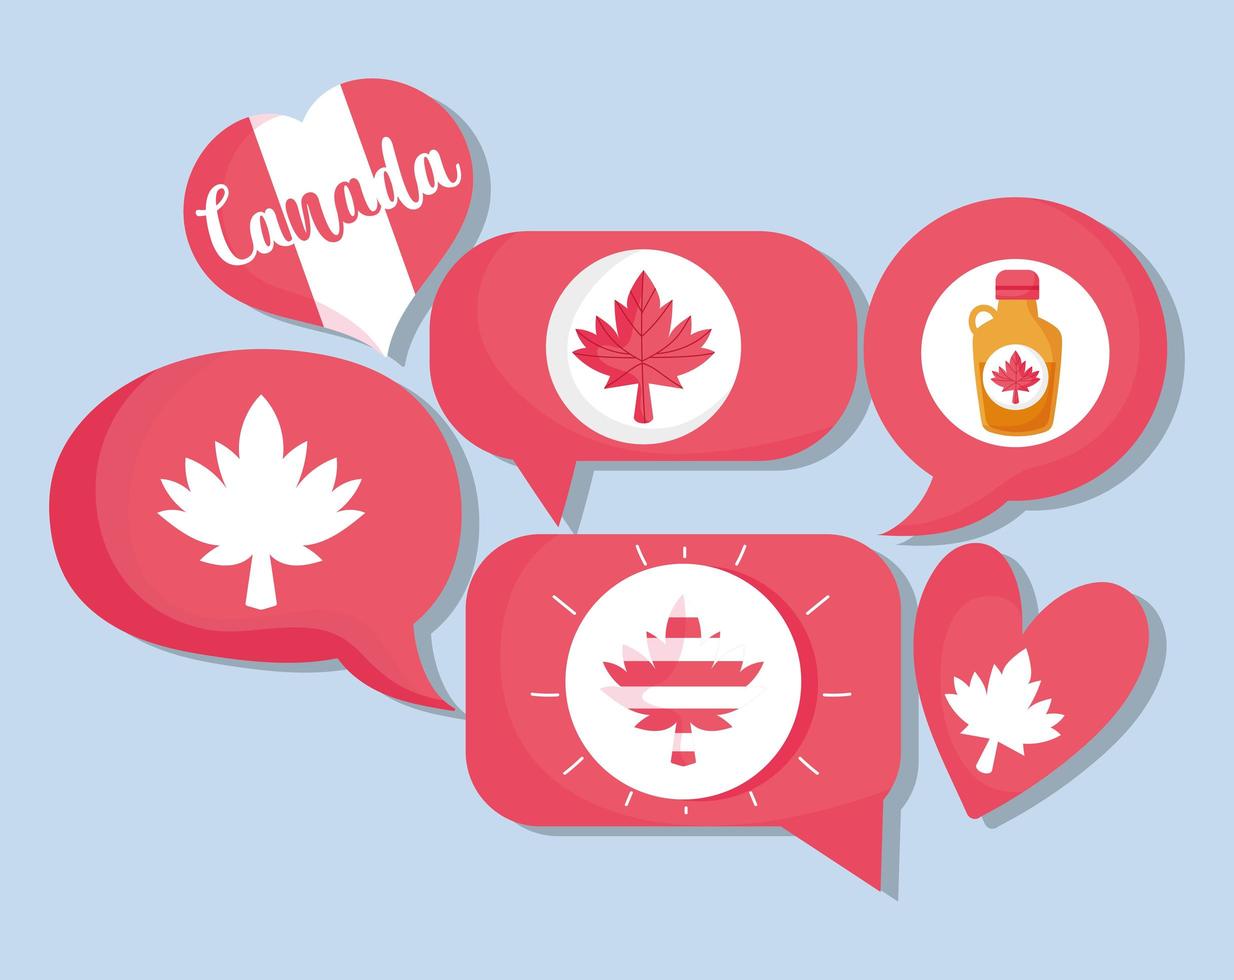 Canadian icons for Canada Day celebration vector